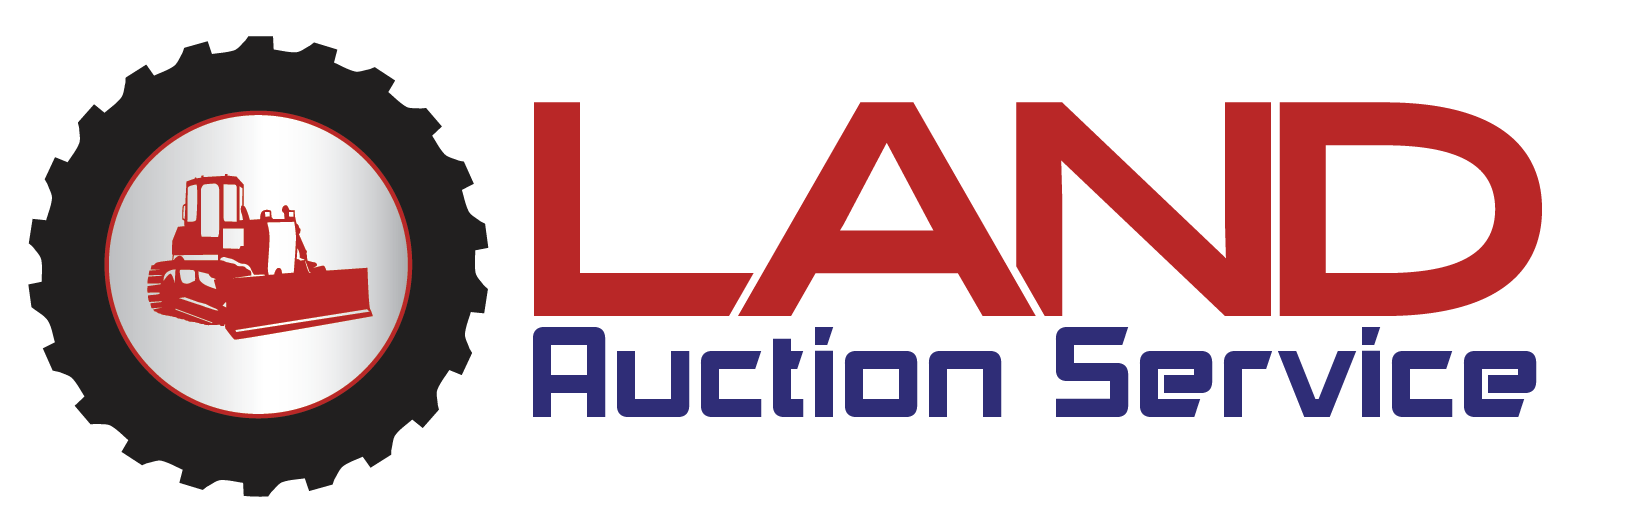 Auction Service Logo - land-auction-service-LOGO-V3-01-01 – Industrial Market Place